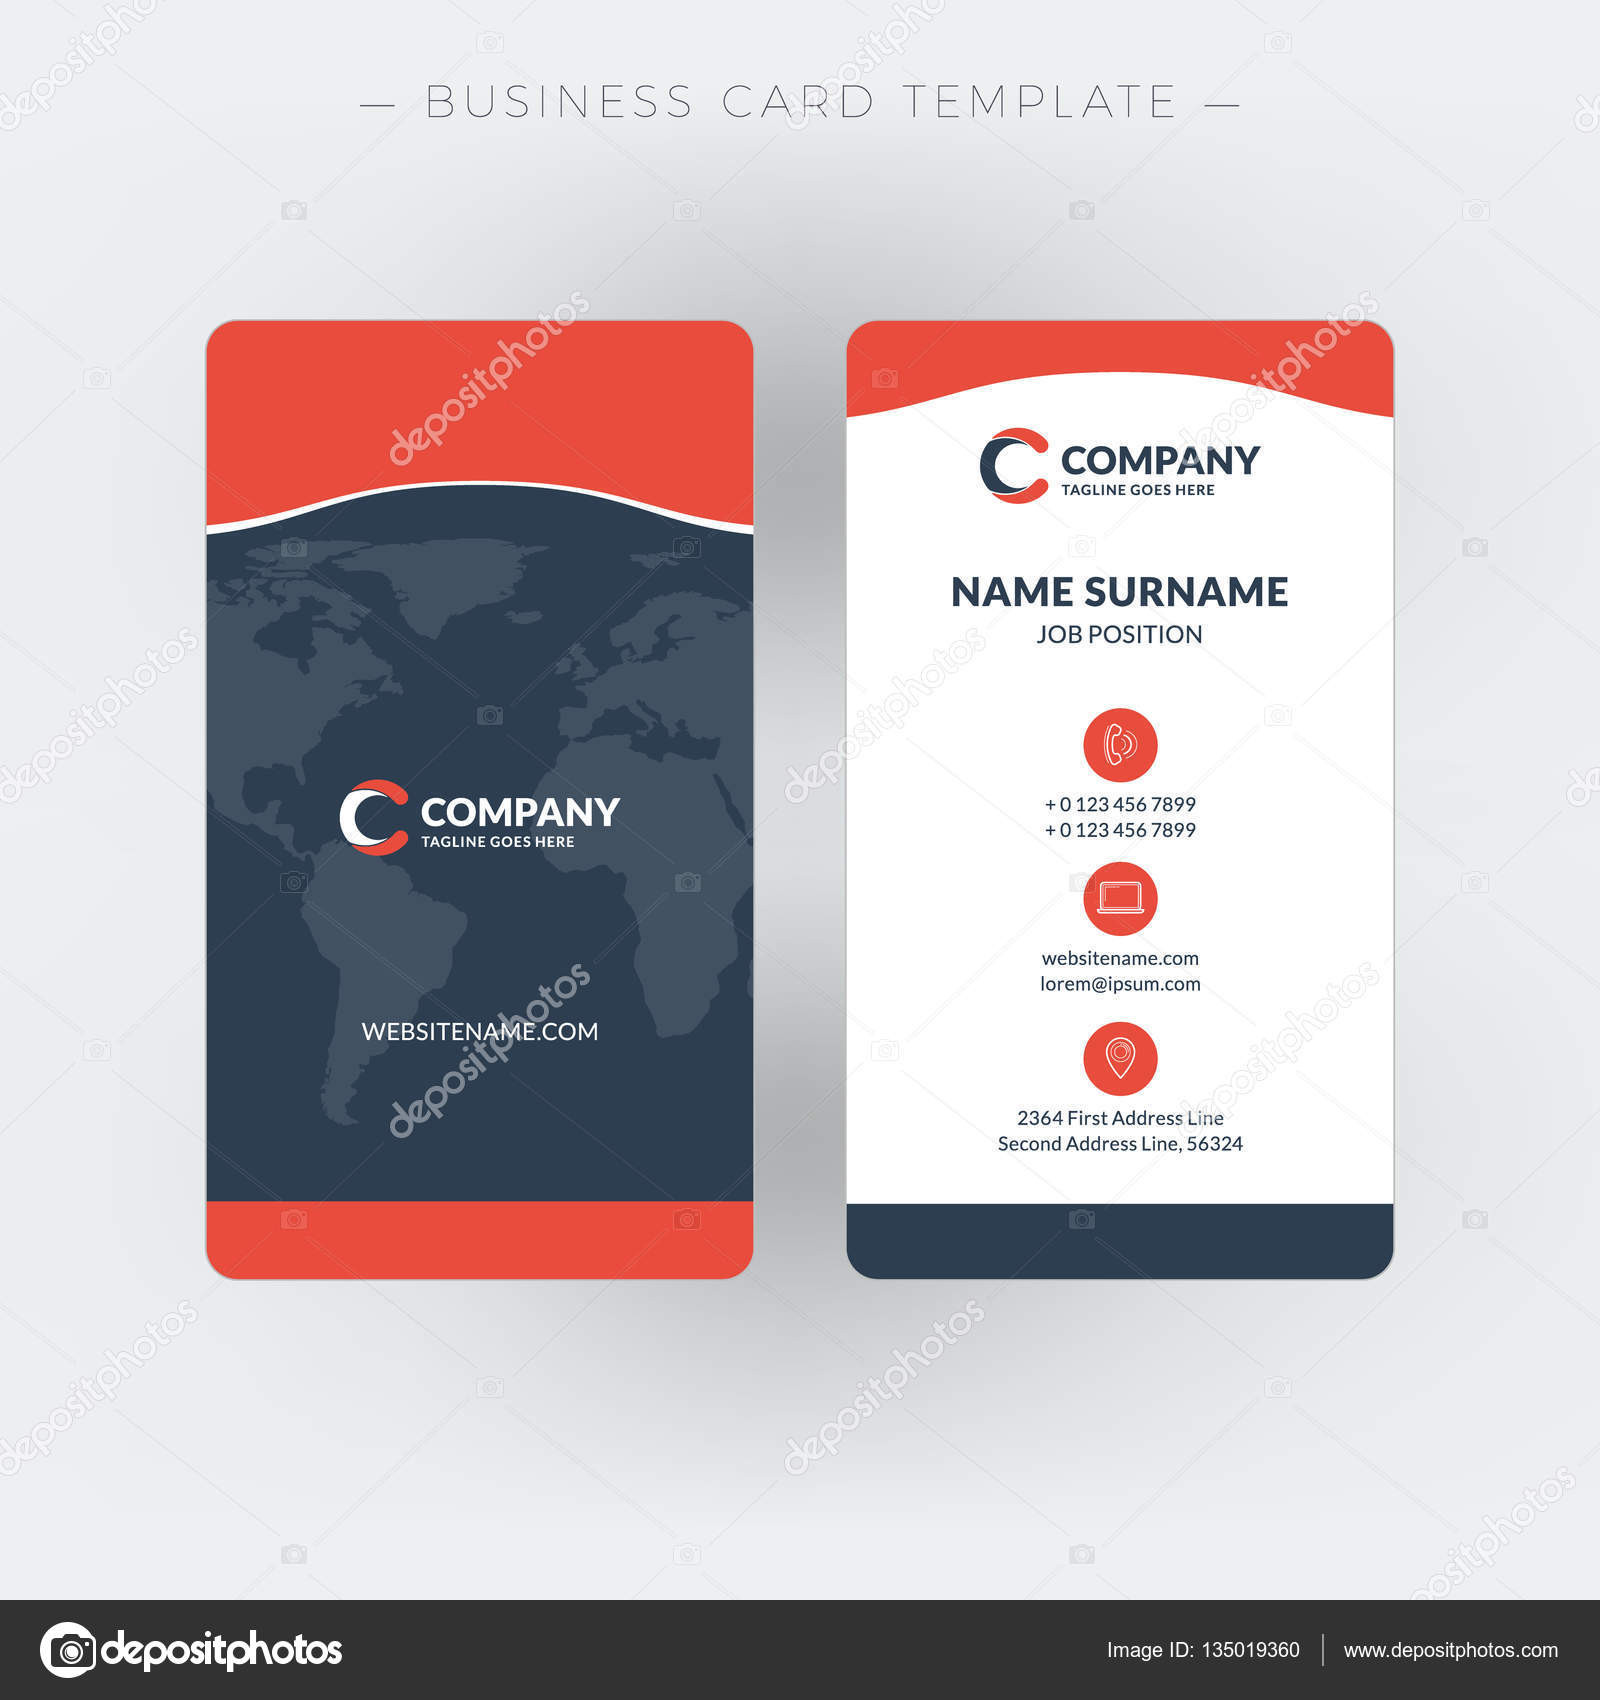 86 Marvelous Double Sided Business Cards Professional Of Double Sided Business Card Template Photoshop